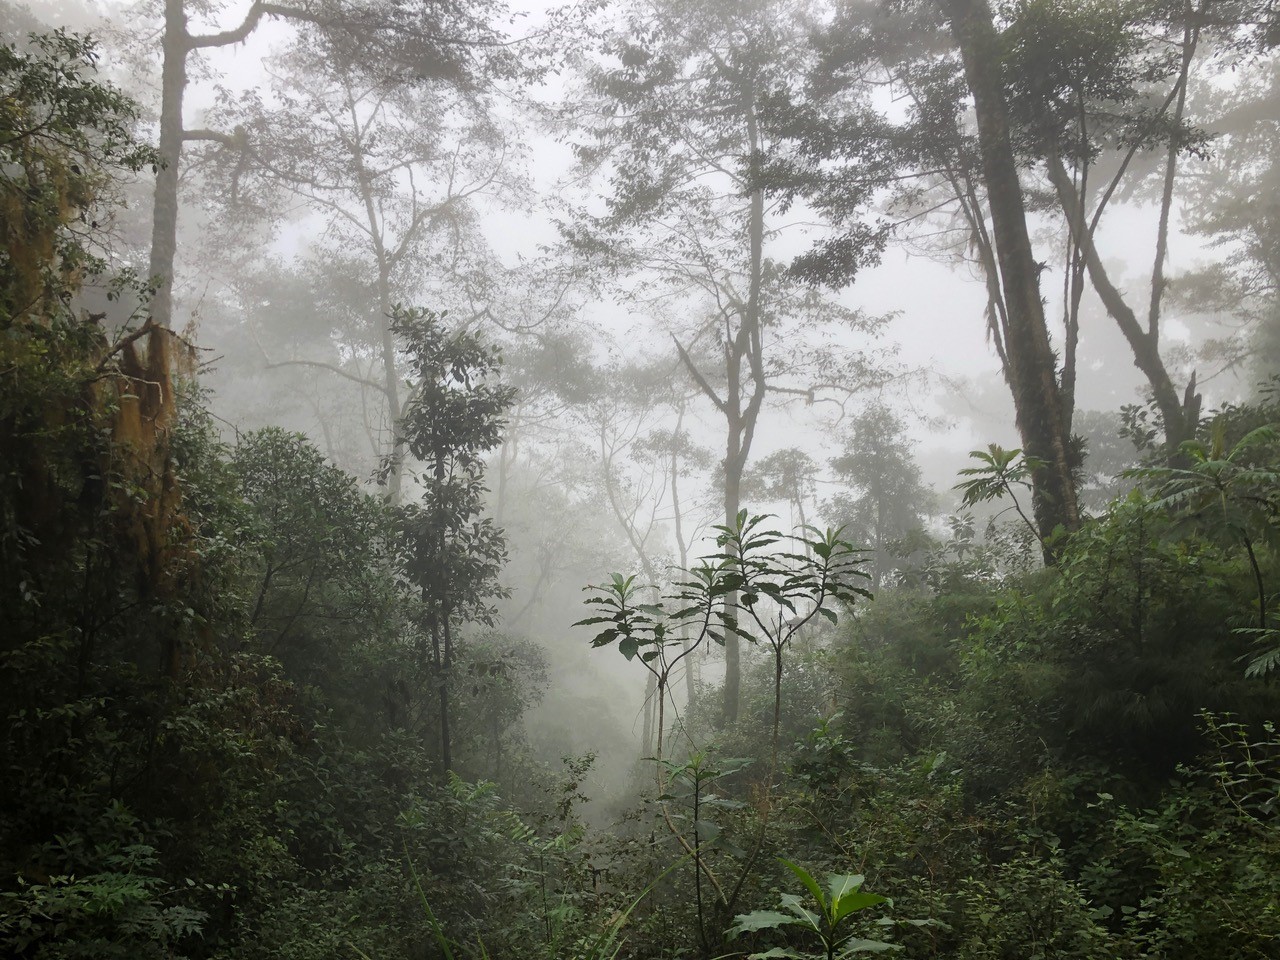 A tropical cloud forest - from a field trip to Costa Rica.